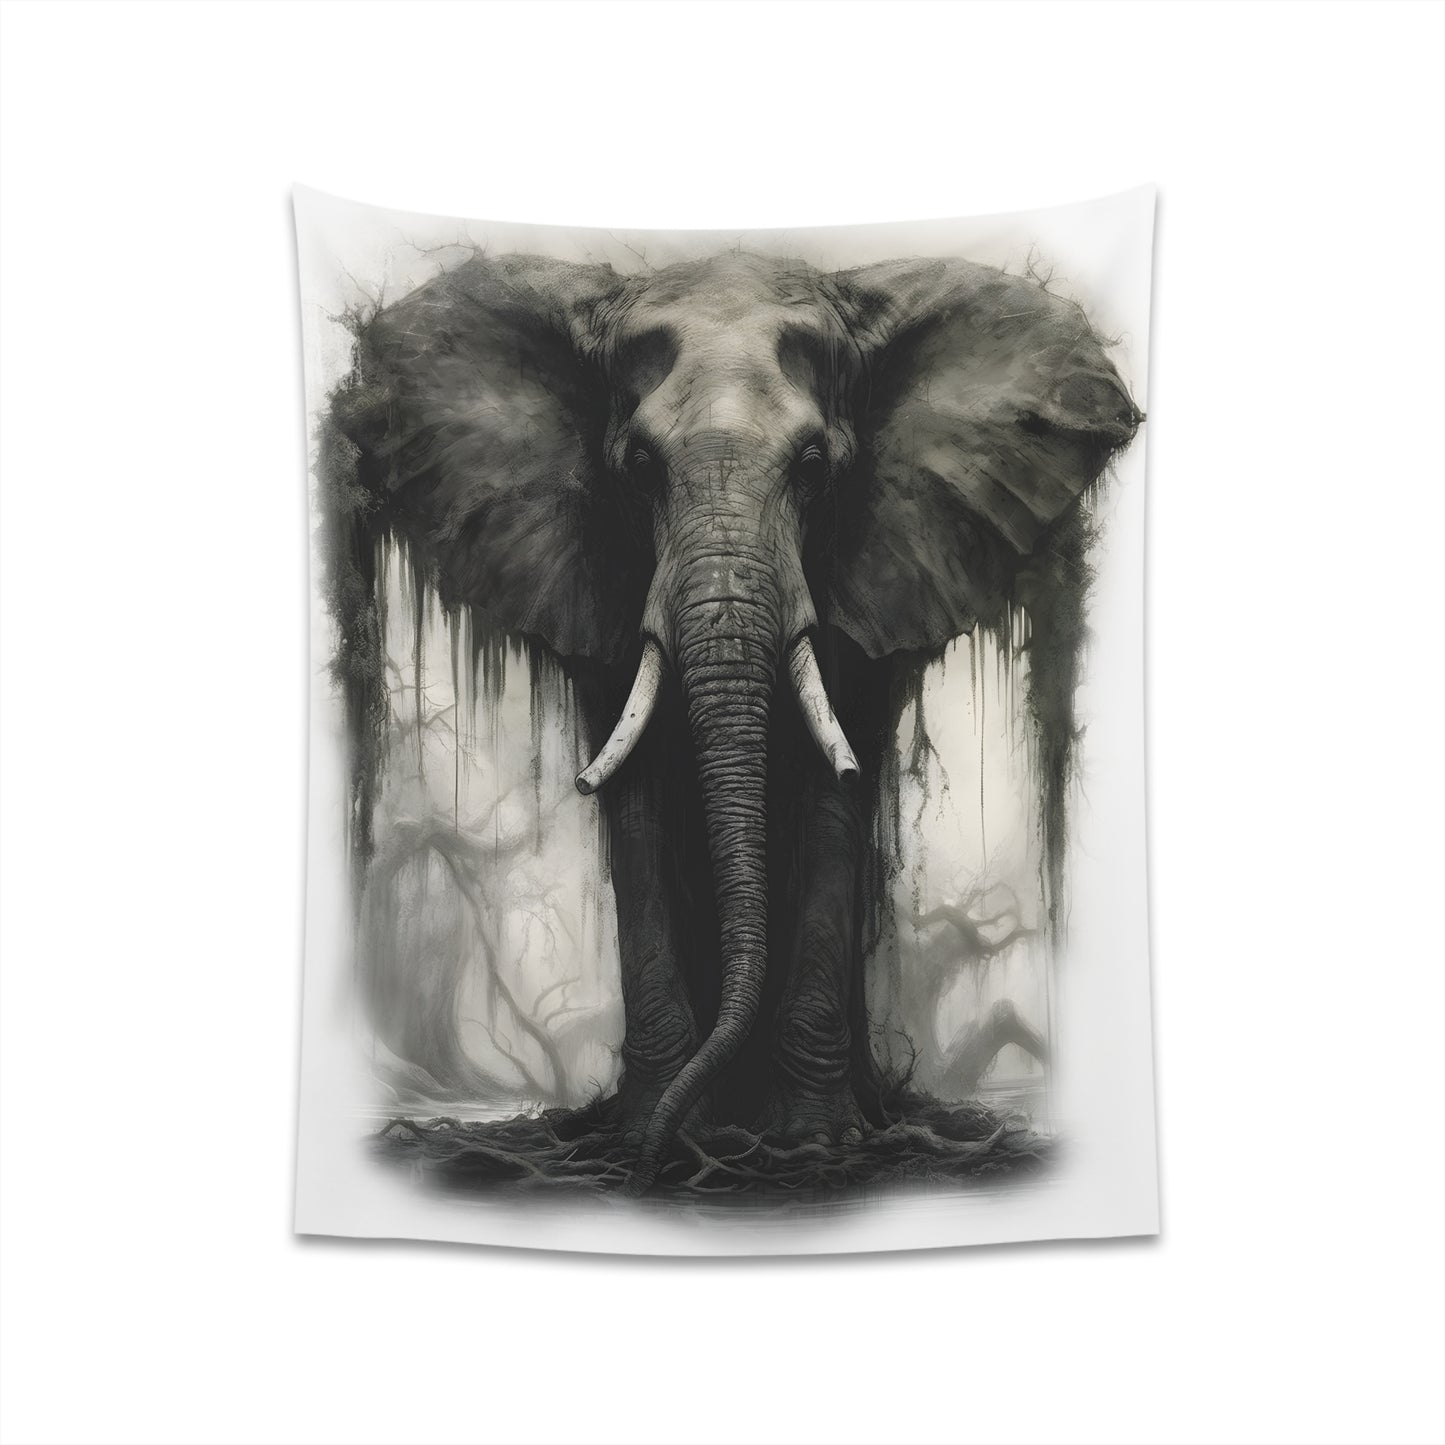 Gothic Elephant Showering Under a Tree - Surreal Wall Tapestry